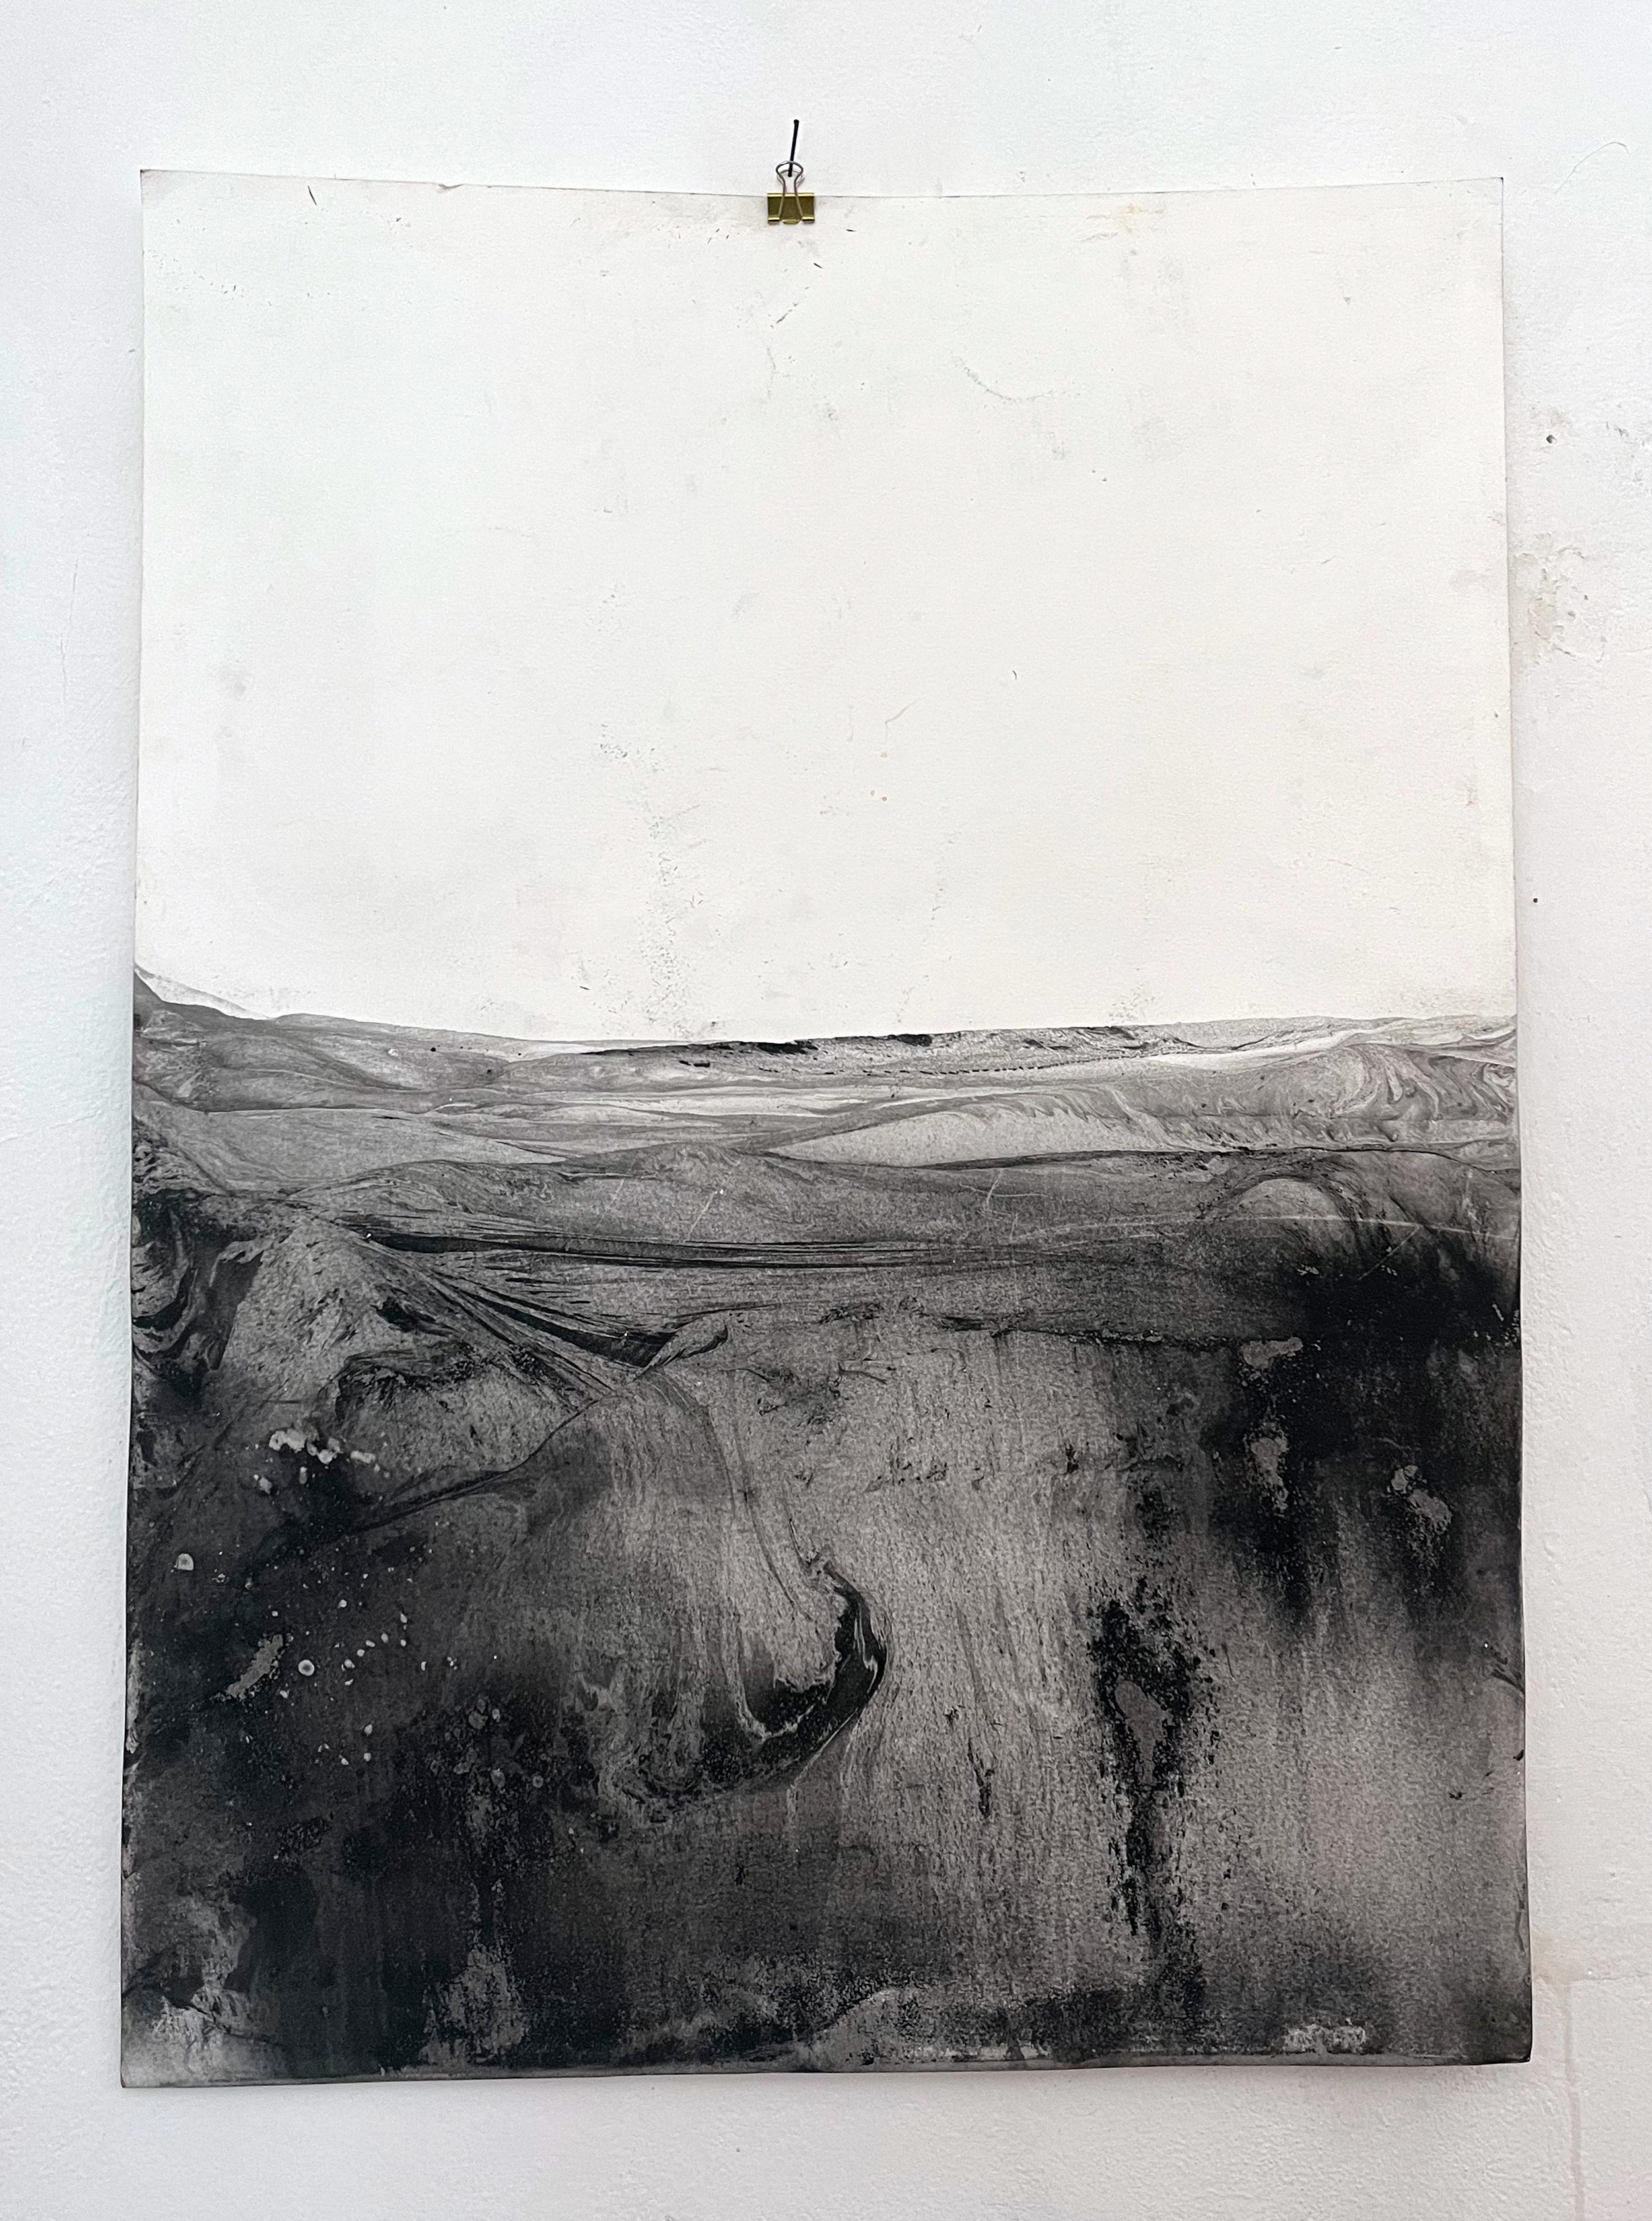 Landscape B/W
mineral oxide on Paper / Fabriano Rosaspina Paper
55x75 cm

one of a kind
the painting can be shipped with the frame ready to hang, or on a rigid support with passpartout.
framing options can be agreed with the buyer

Marilina